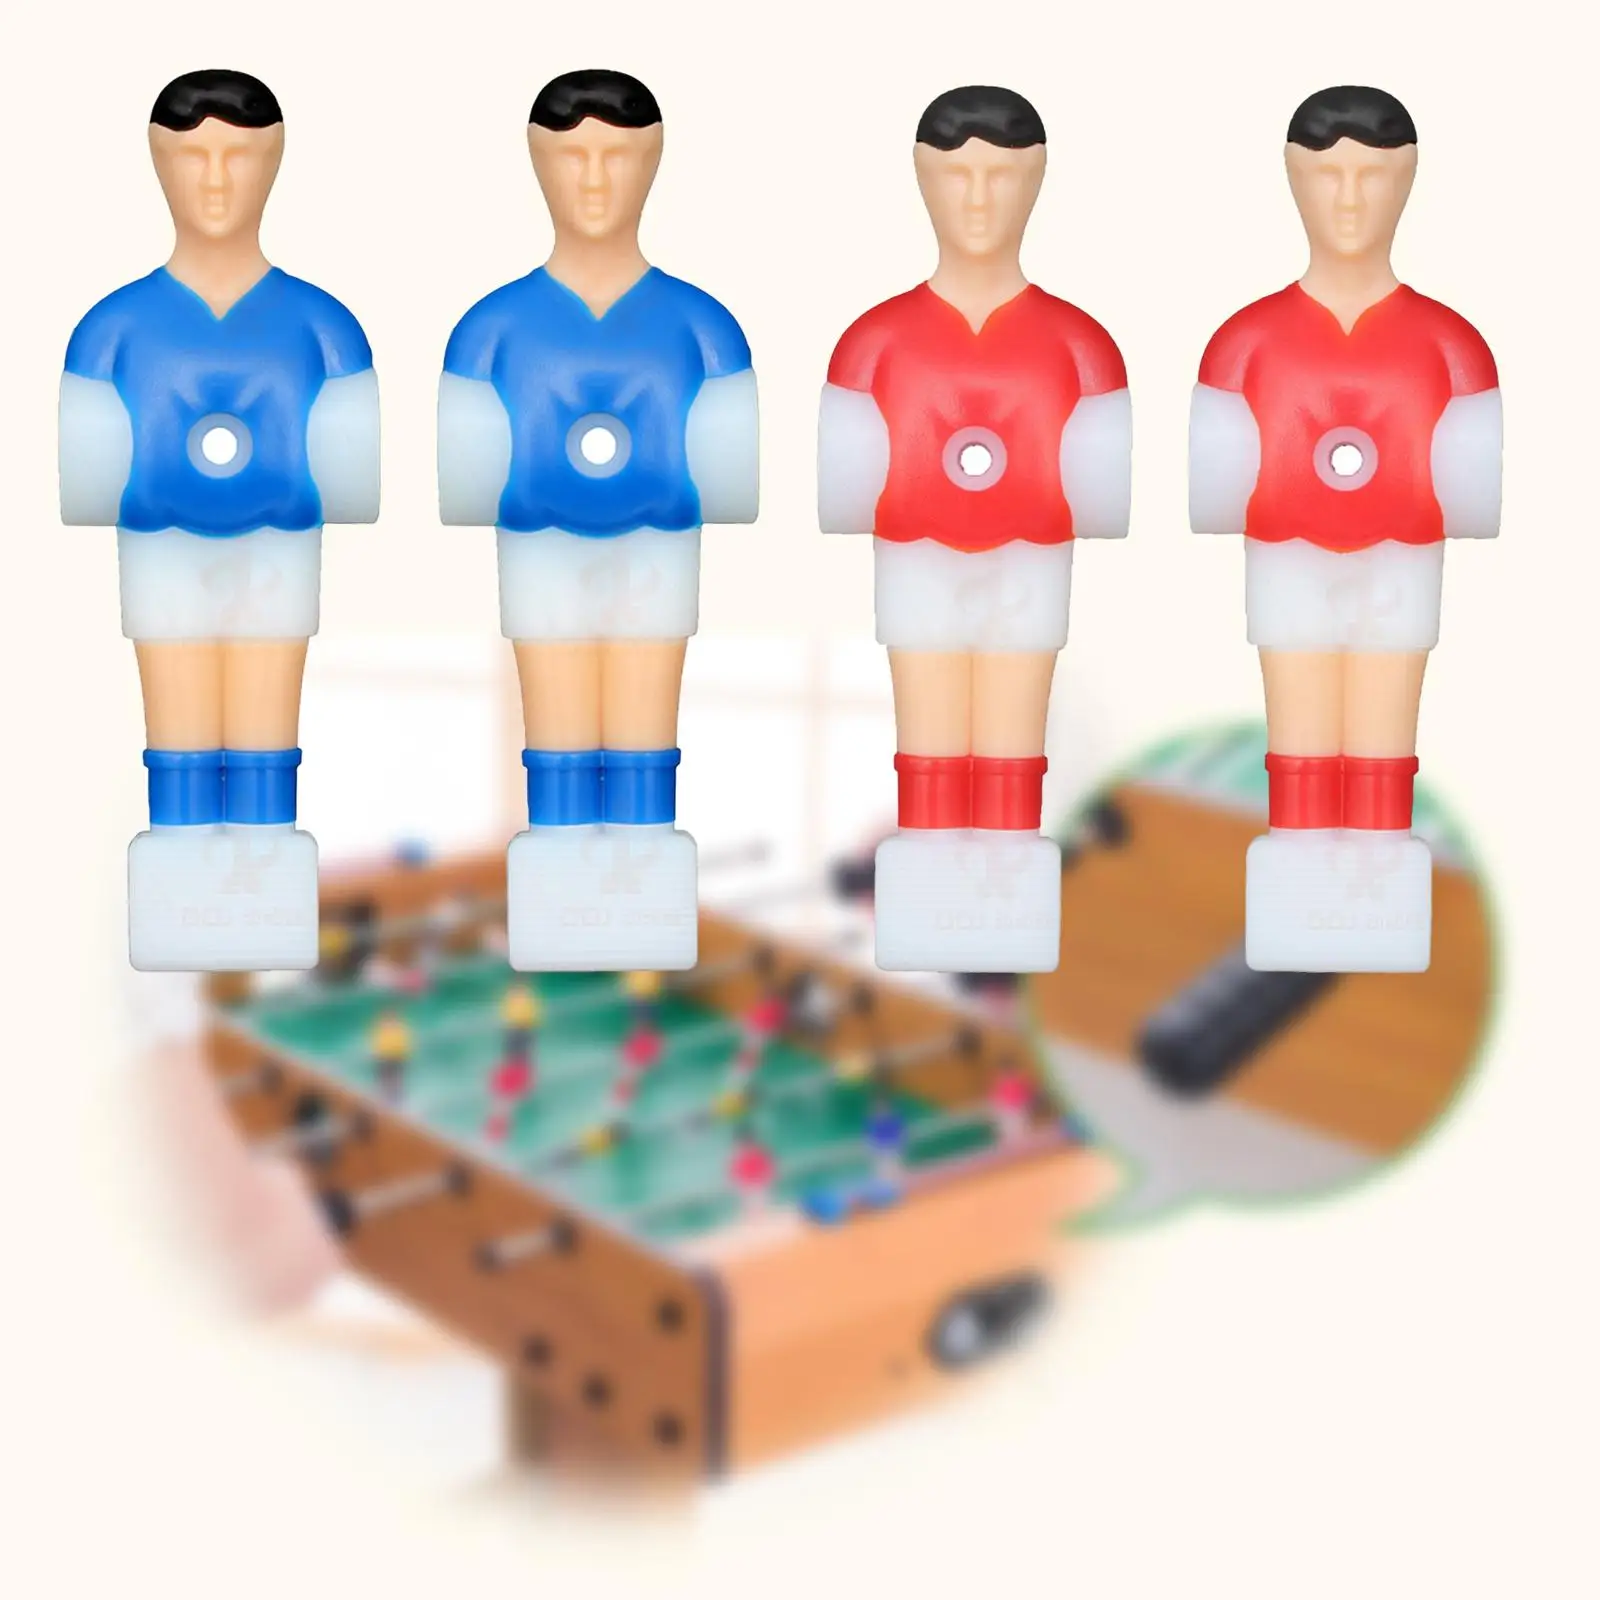 4Pcs Mini Doll Table Football Men Replacement Soccer Table Player Football Players Figures Toys Table Football Player Accessory 4pcs football soccer elastic captain armband basketball adjustable player bands